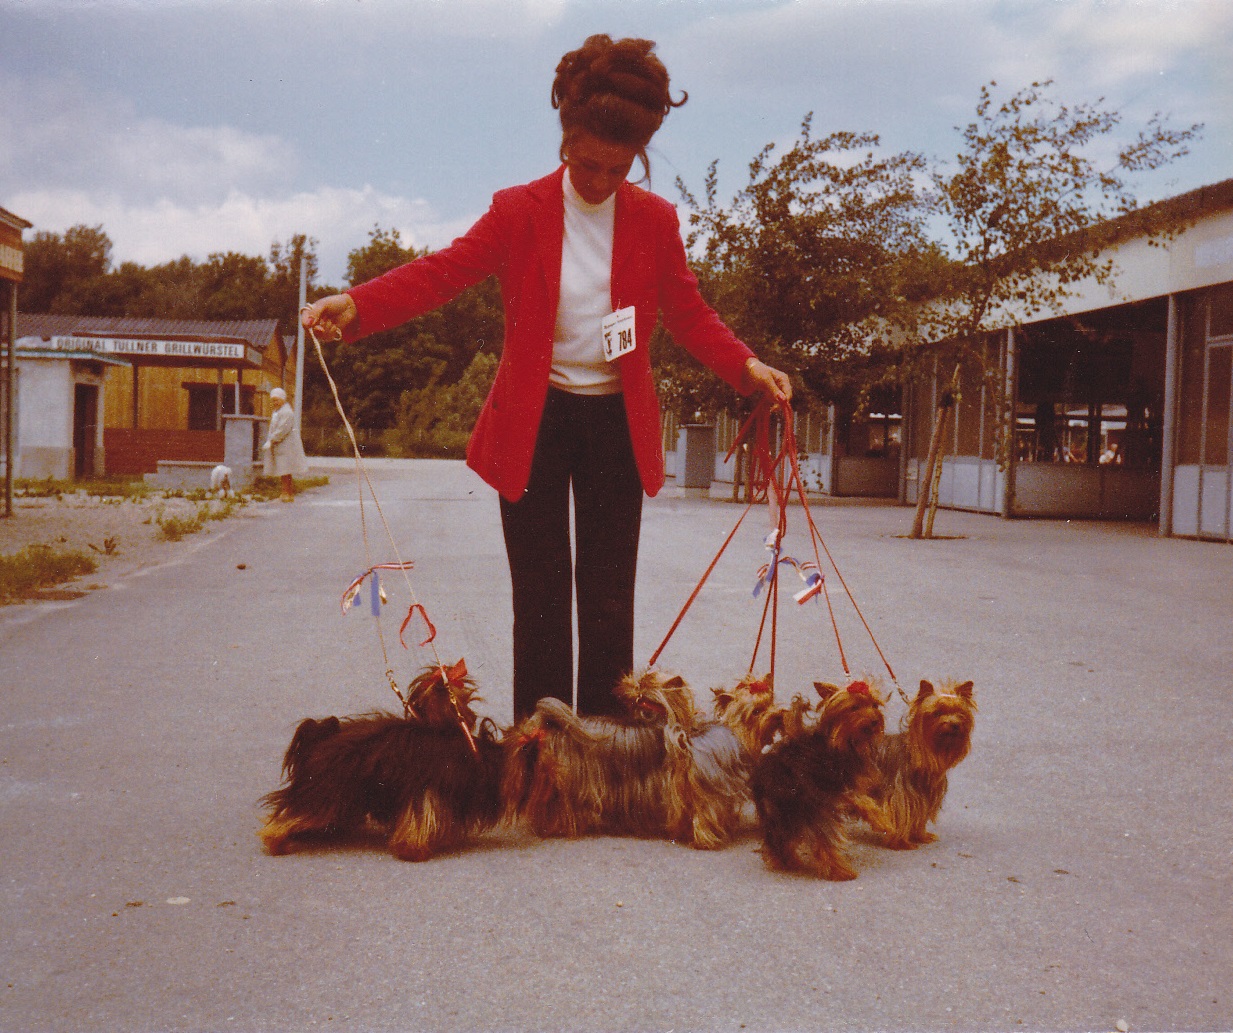 Mrs. Biewer and her Yorkshire Terriers at a Dog Show